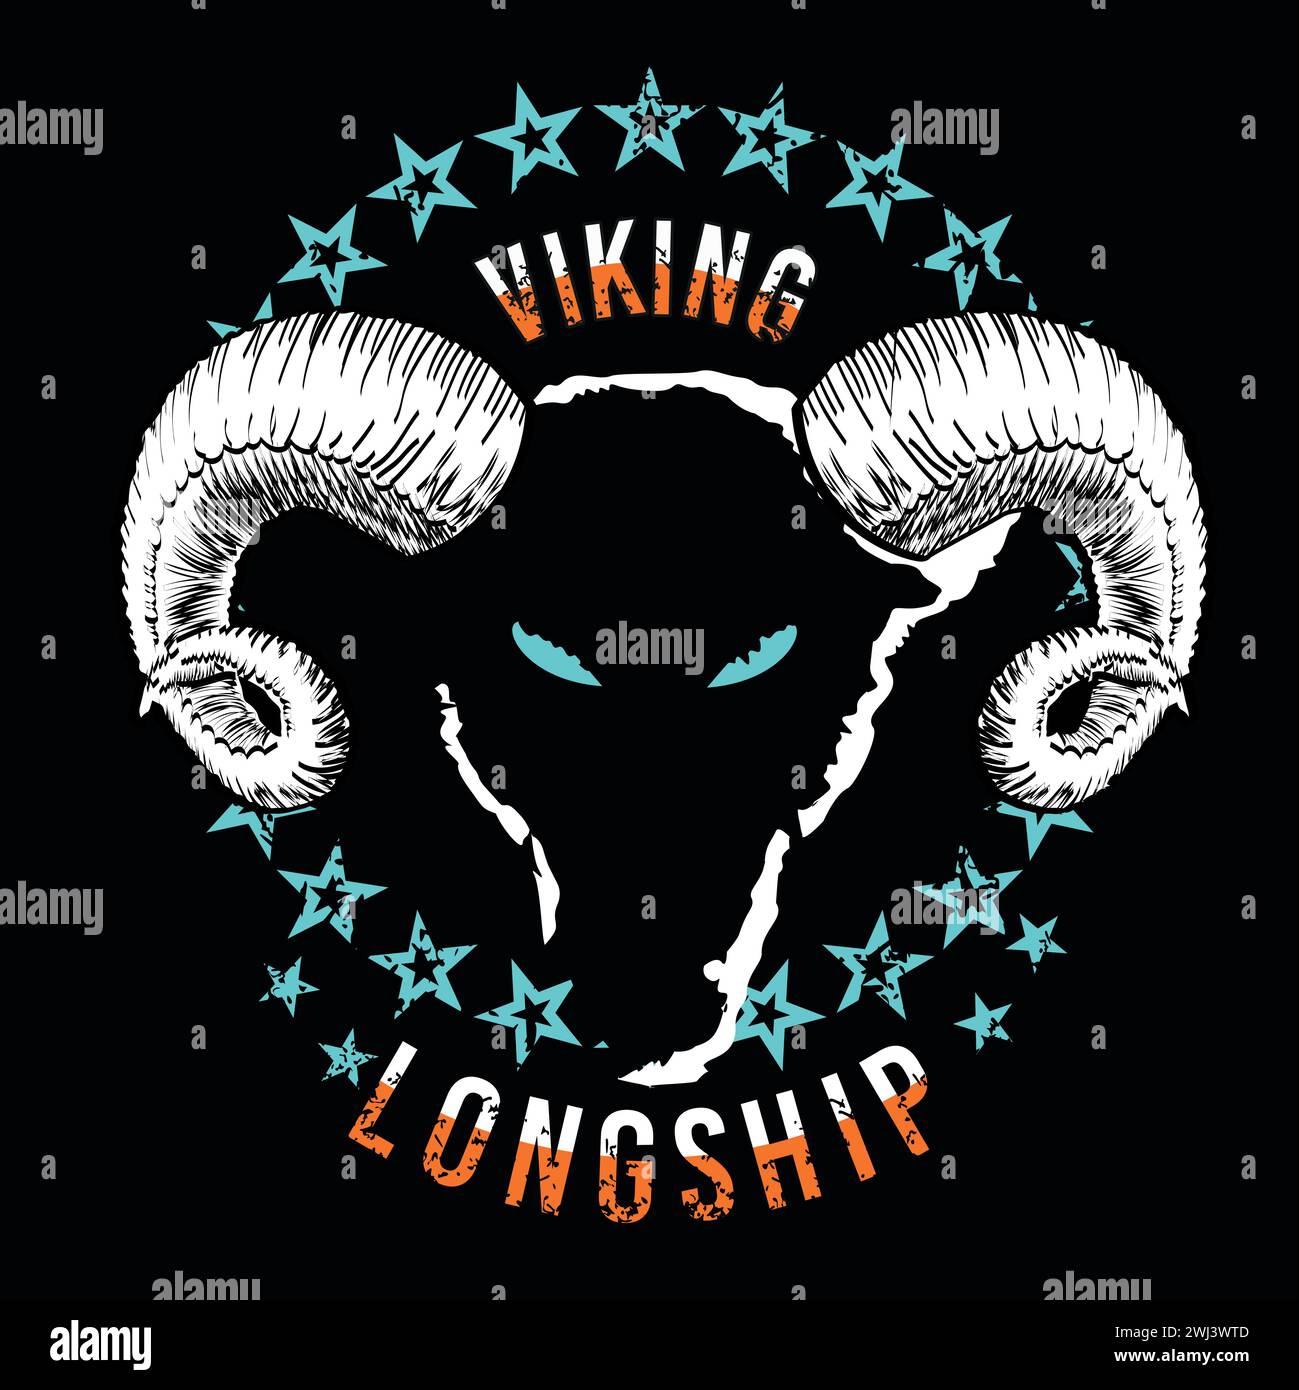 Viking longship. T-shirt design of the head of a goat surrounded by stars on a black background, Stock Vector